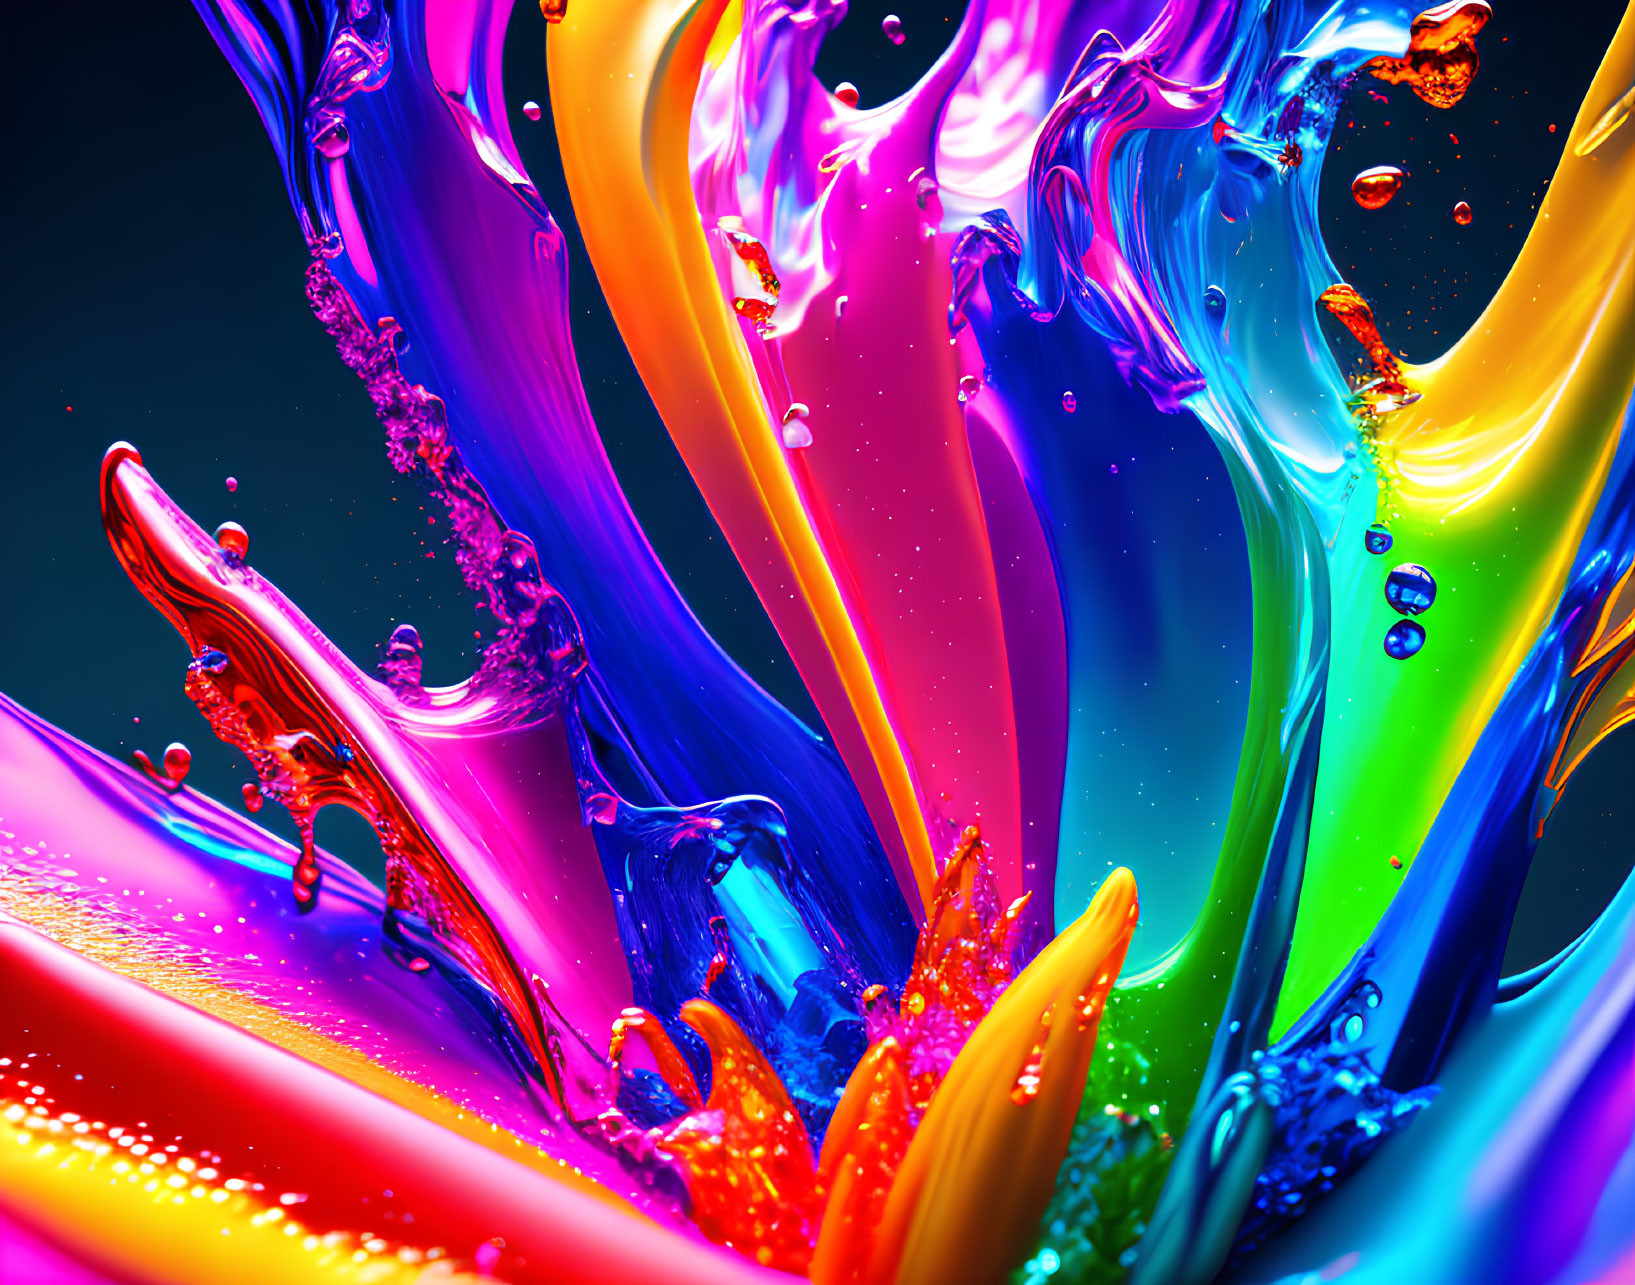 Colorful liquid splashes in dynamic abstract scene